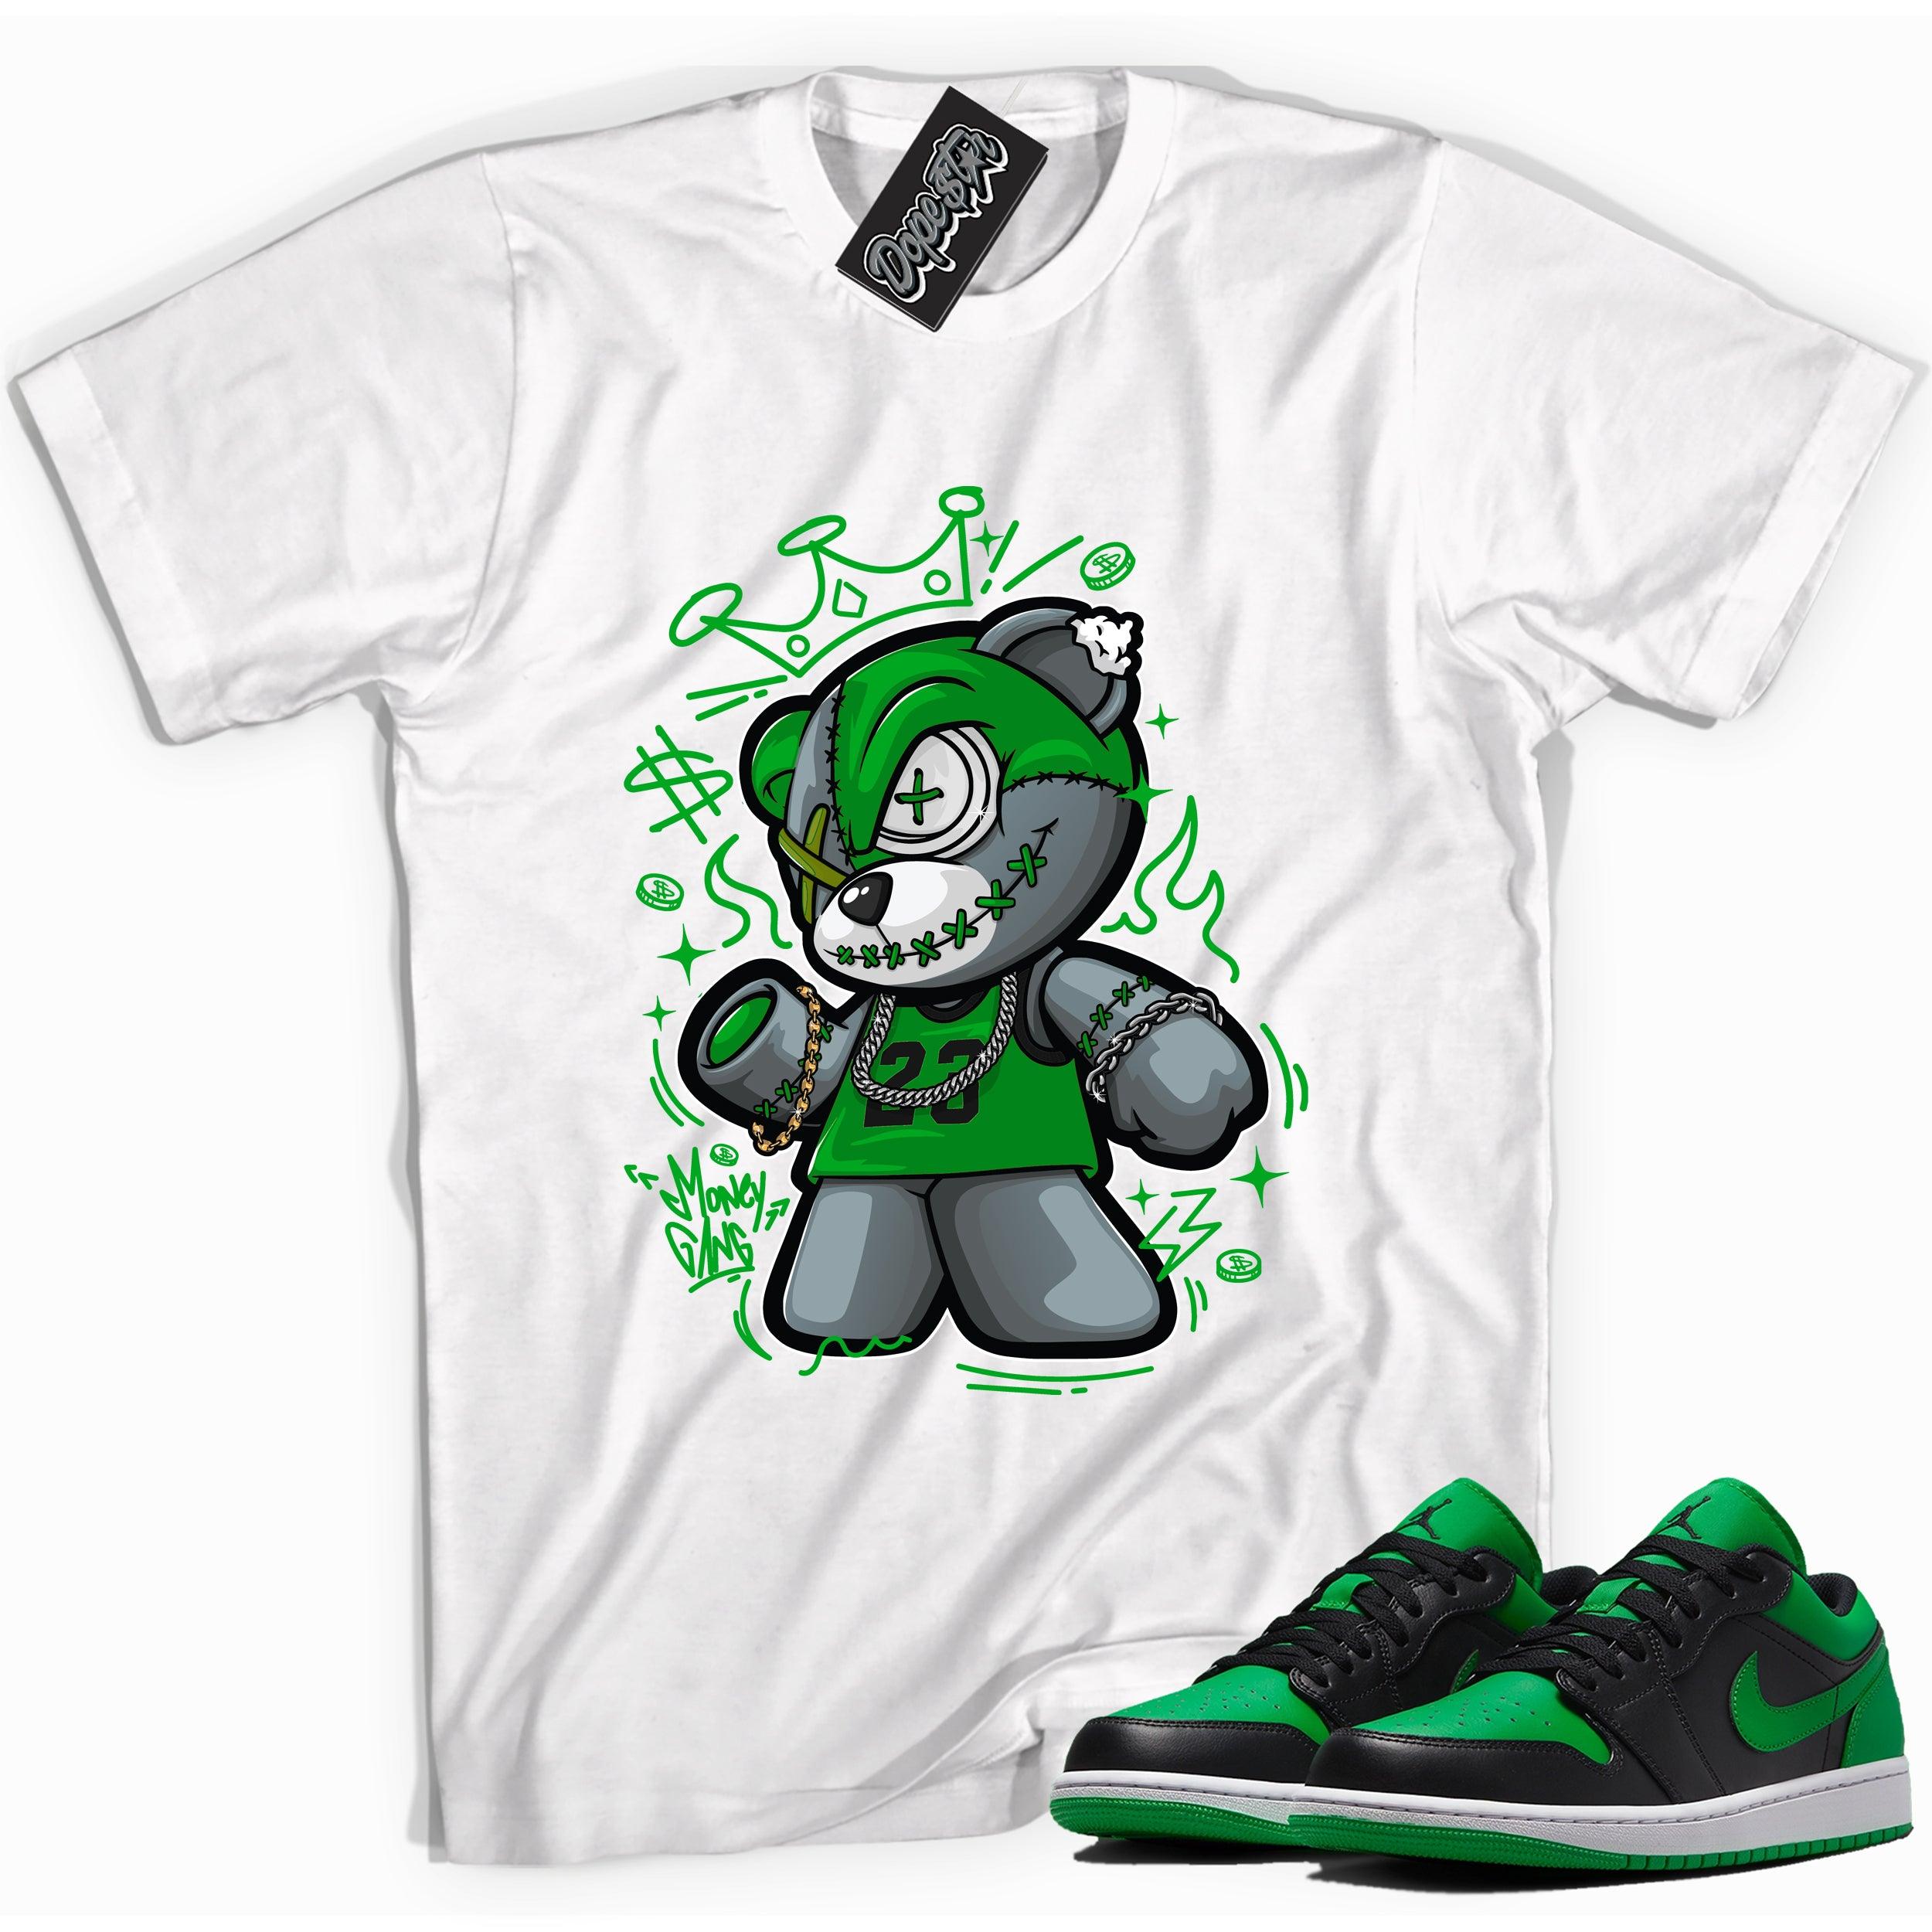 Cool white graphic tee with 'money gang bear' print, that perfectly matches Air Jordan 1 Low Lucky Green sneakers